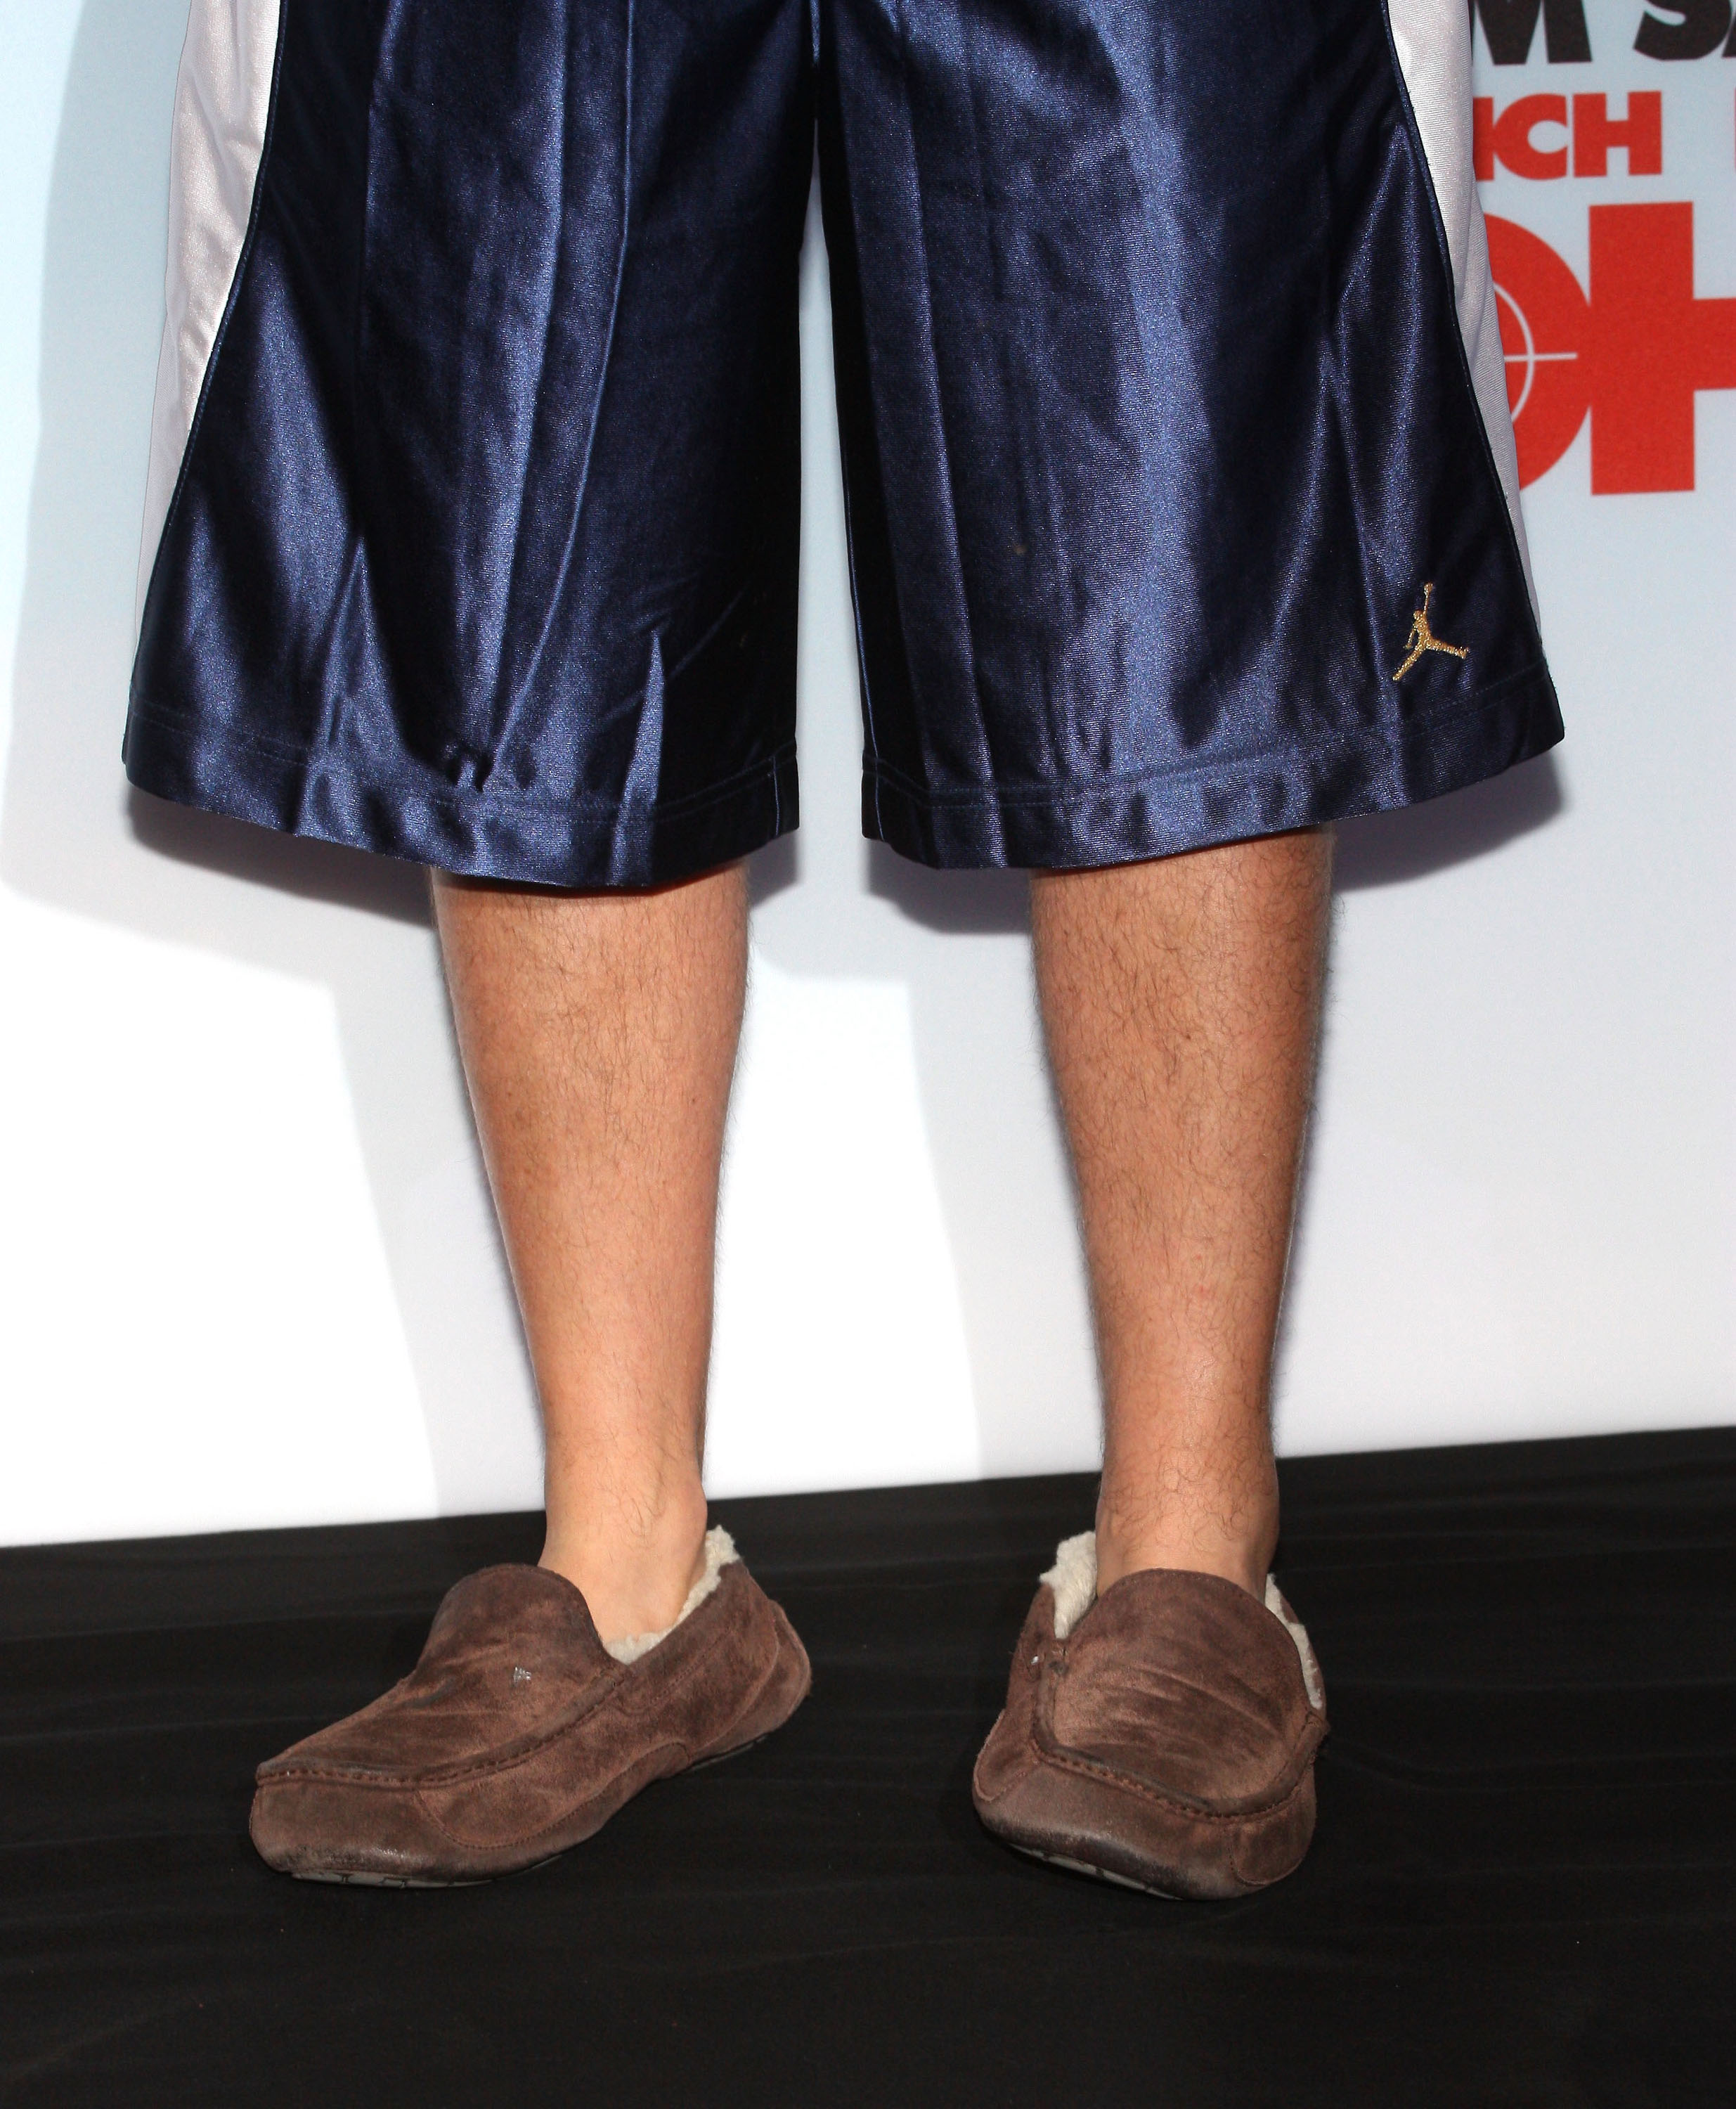 The slippers actor Adam Sandler was wearing in Berlin, Germany on July 28, 2008 | Source: Getty Images